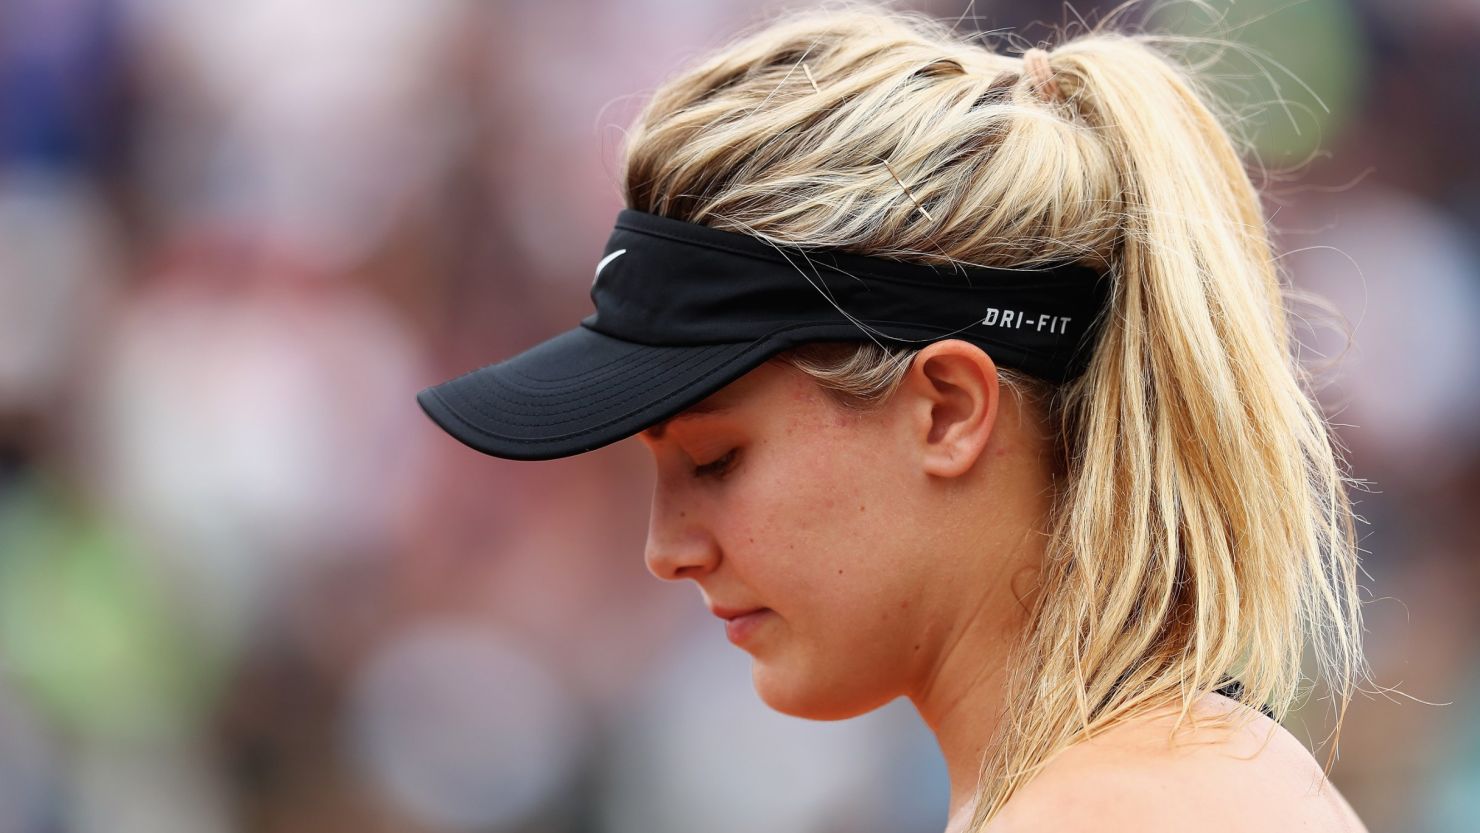 Eugenie Bouchard was tipped as one of tennis' brightest prospects after a breakout 2014.